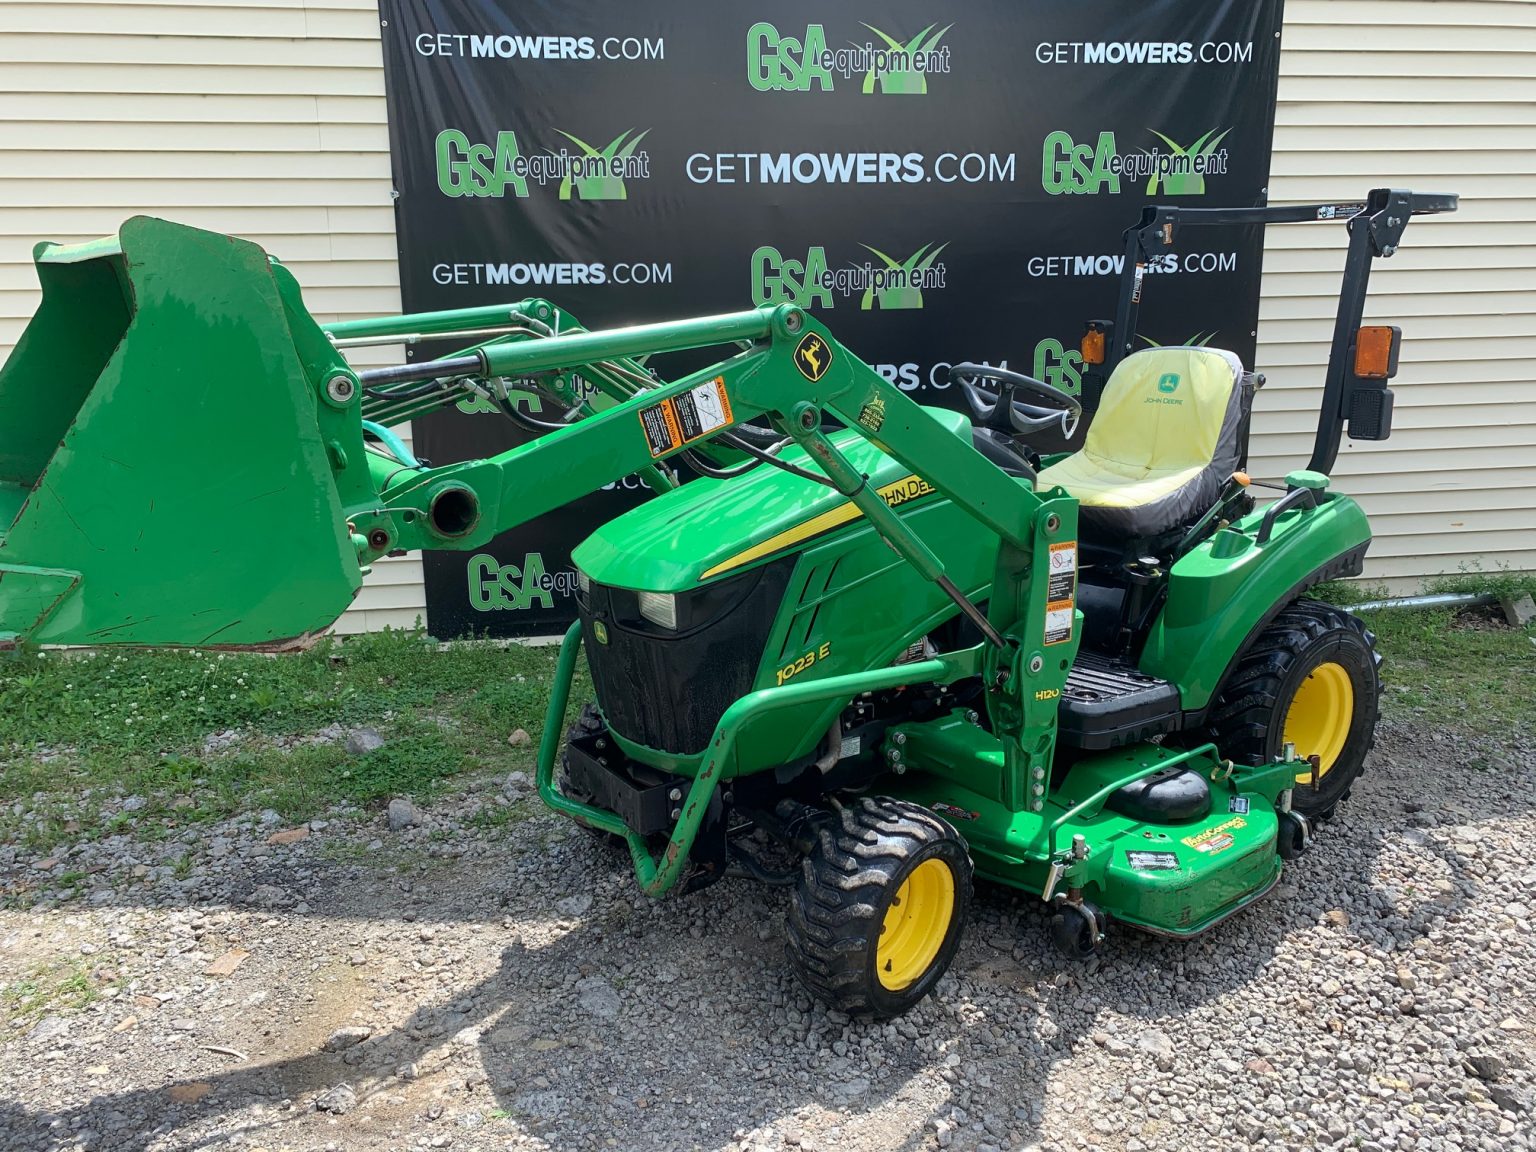 60IN JOHN DEERE 1023E SUB-COMPACT TRACTOR WITH LOADER! $145 A MONTH ...